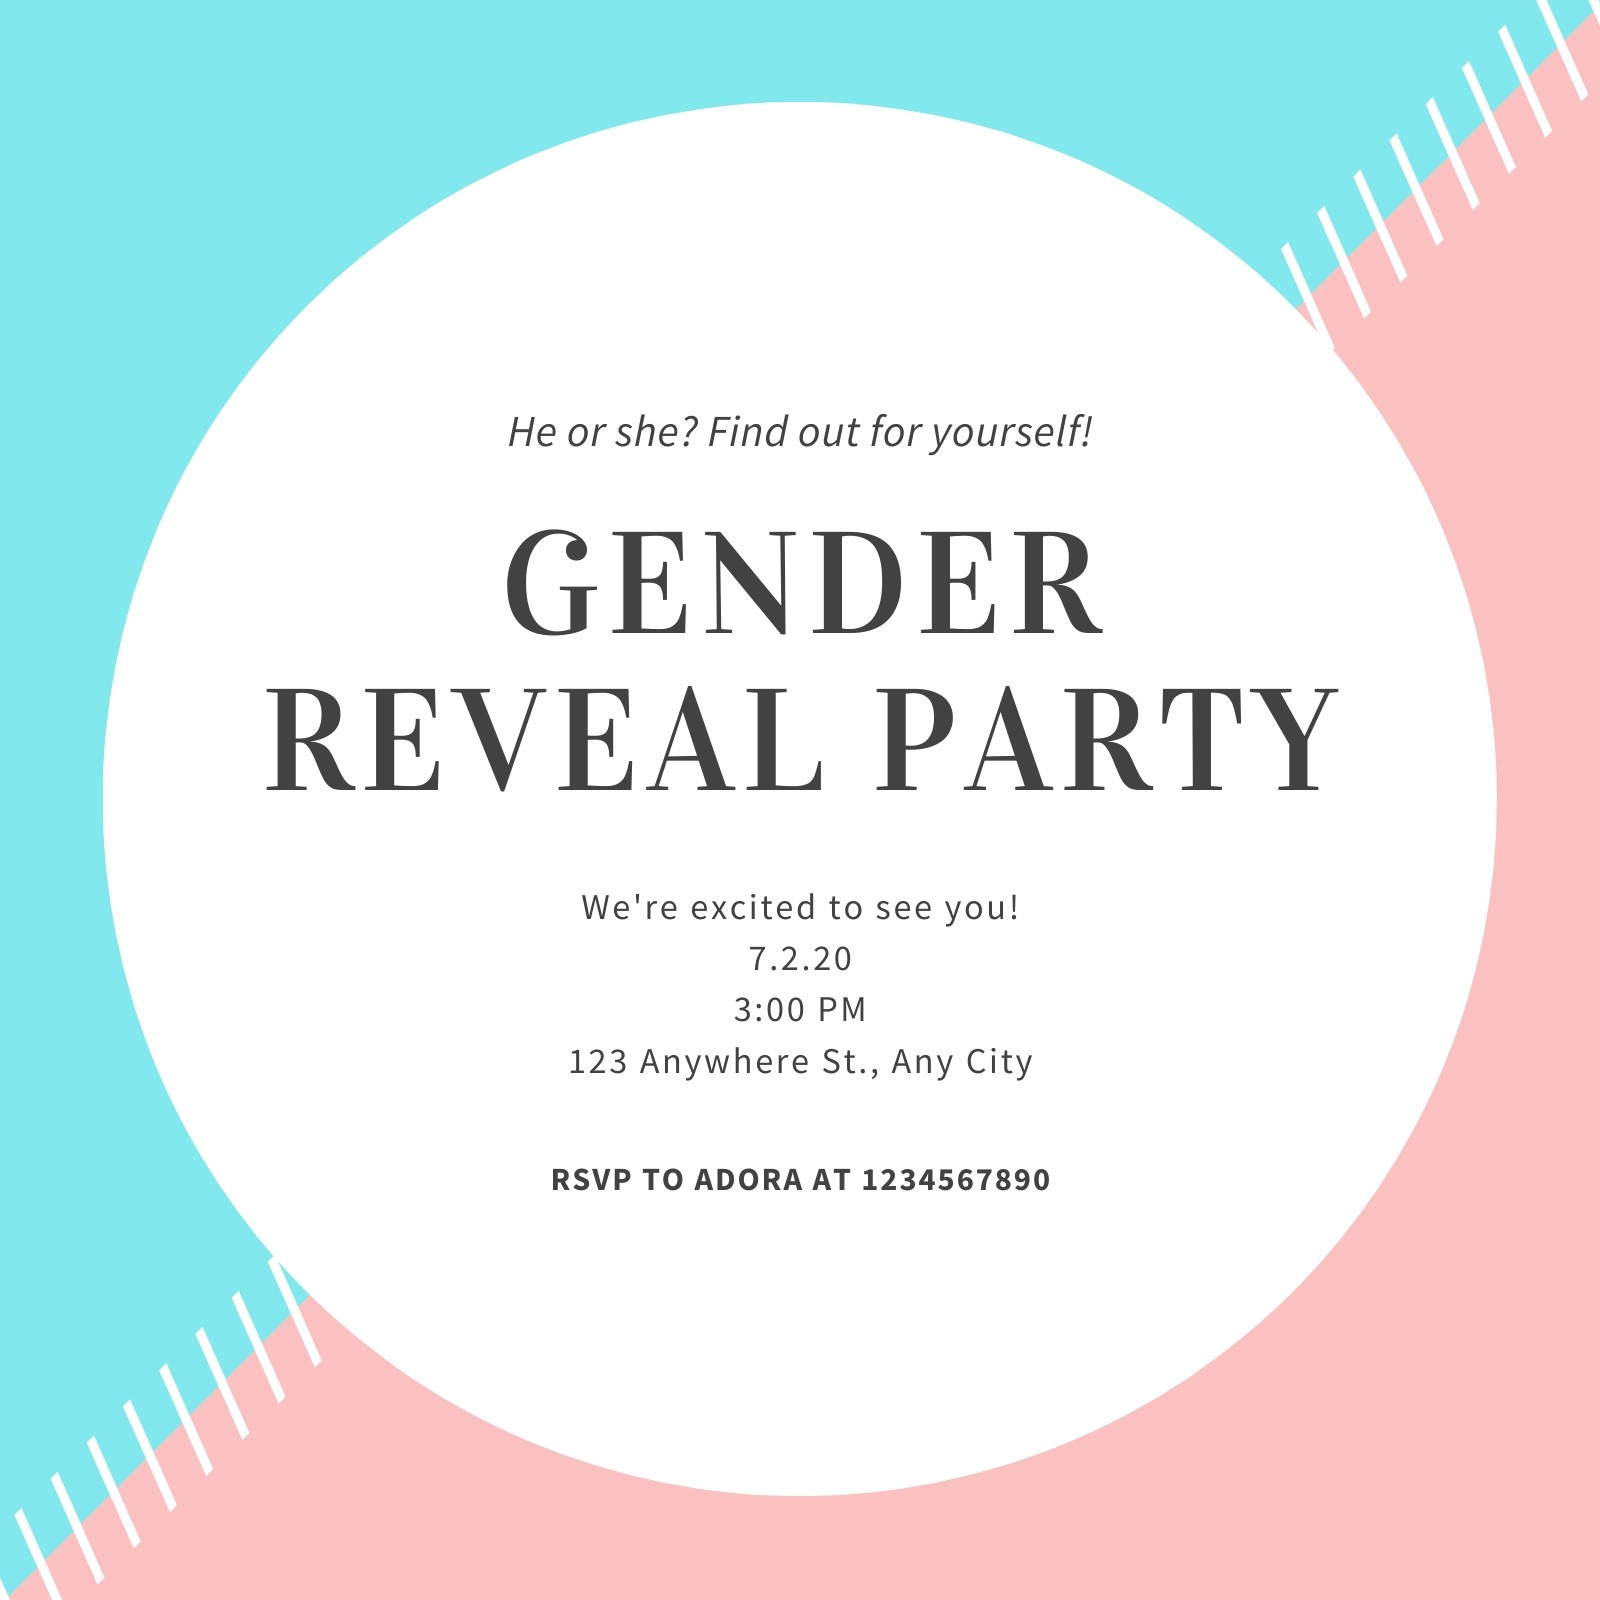 He or she gender reveal invitations free 756869-How to write a gender